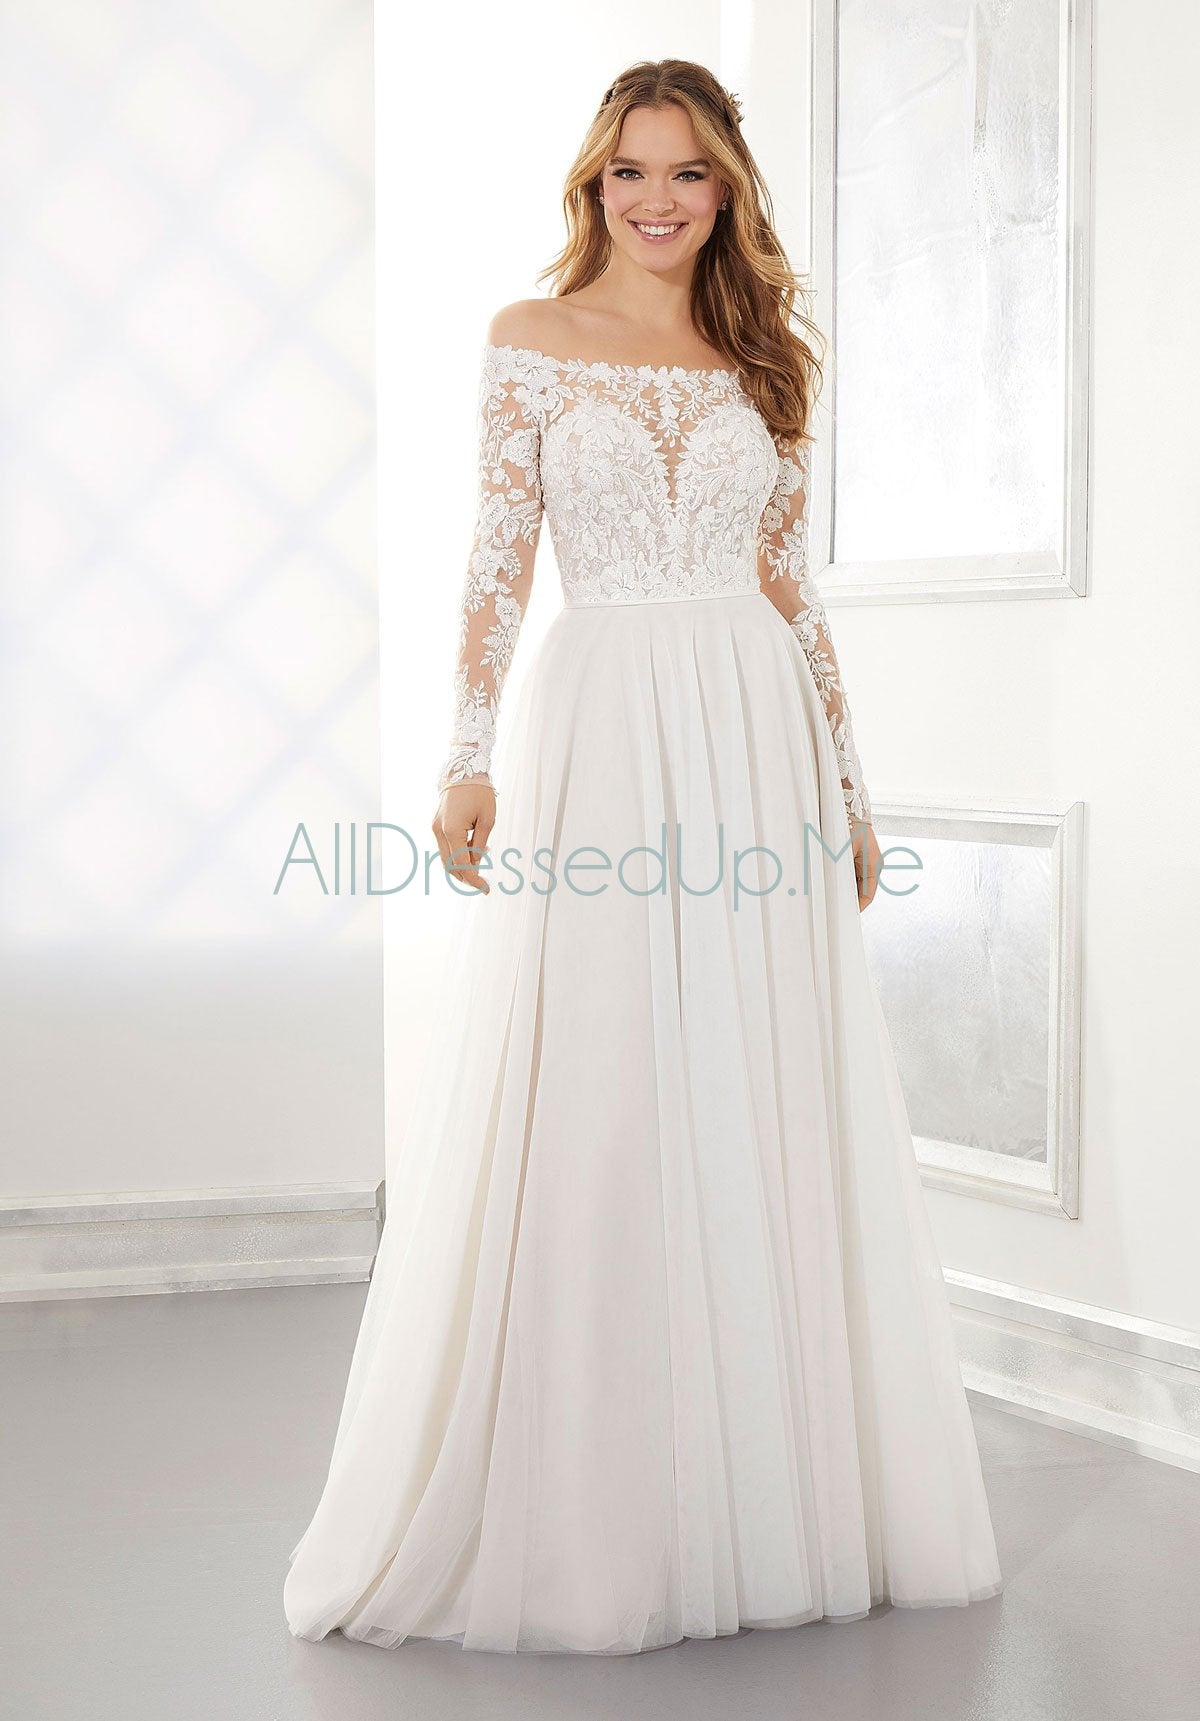 Blu - Ashley - 5877 - Cheron's Bridal, Wedding Gown - Morilee Blu - - Wedding Gowns Dresses Chattanooga Hixson Shops Boutiques Tennessee TN Georgia GA MSRP Lowest Prices Sale Discount